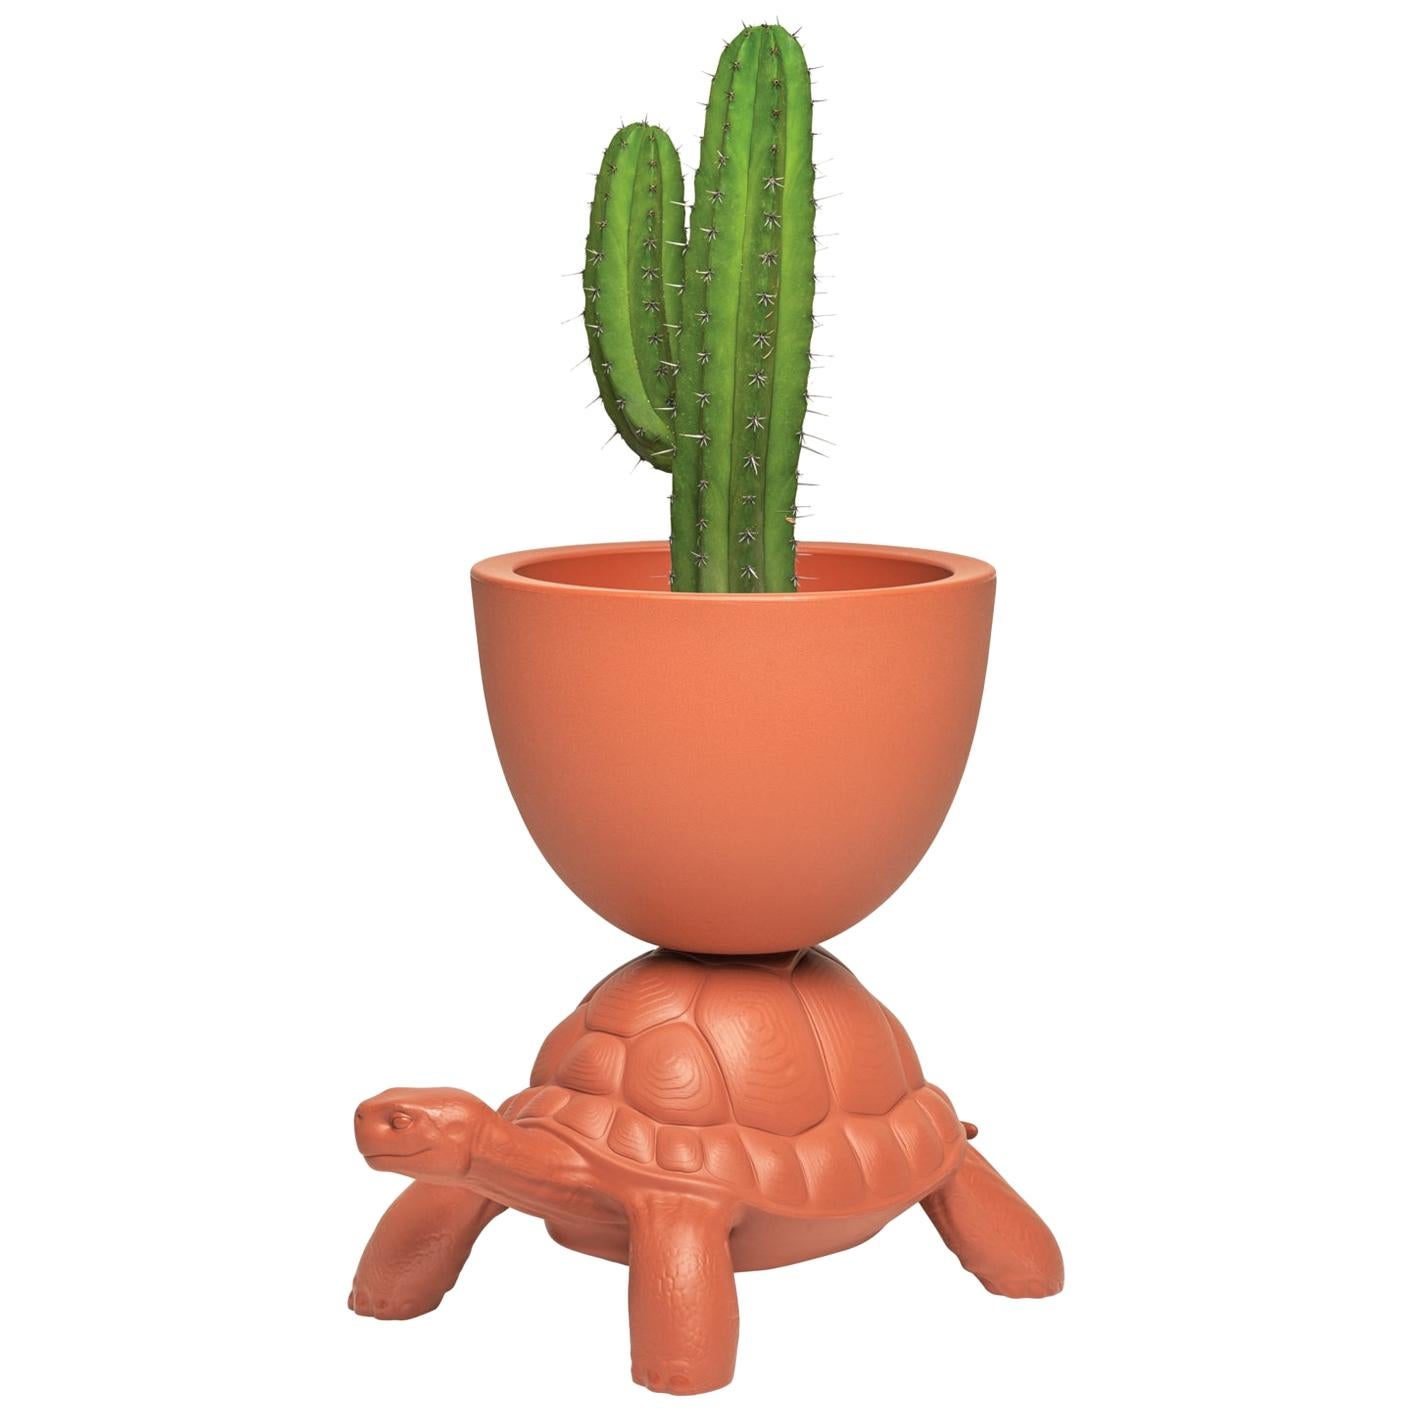 In Stock in Los Angeles, Terracotta Turtle Carry Planter / Champagne Cooler